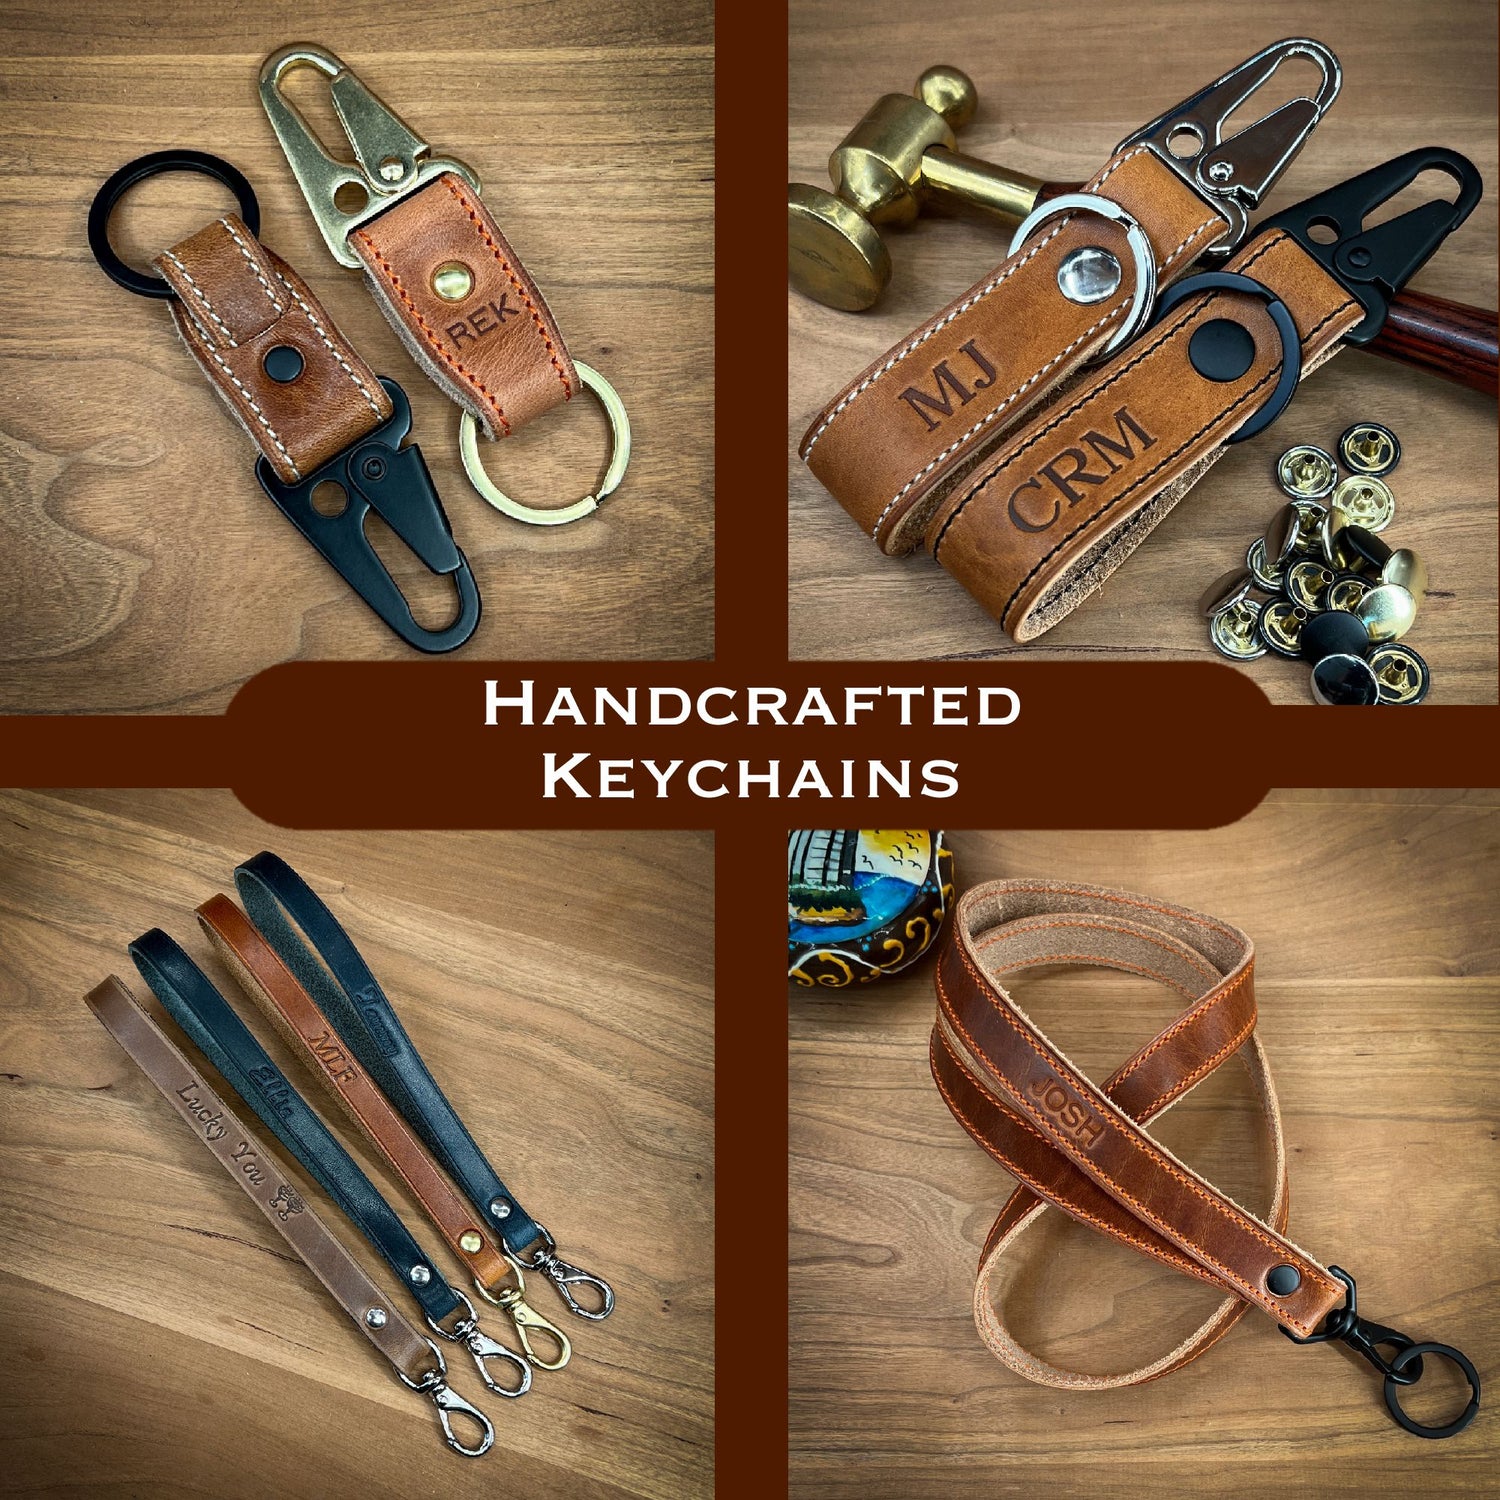 Handcrafted Keychains